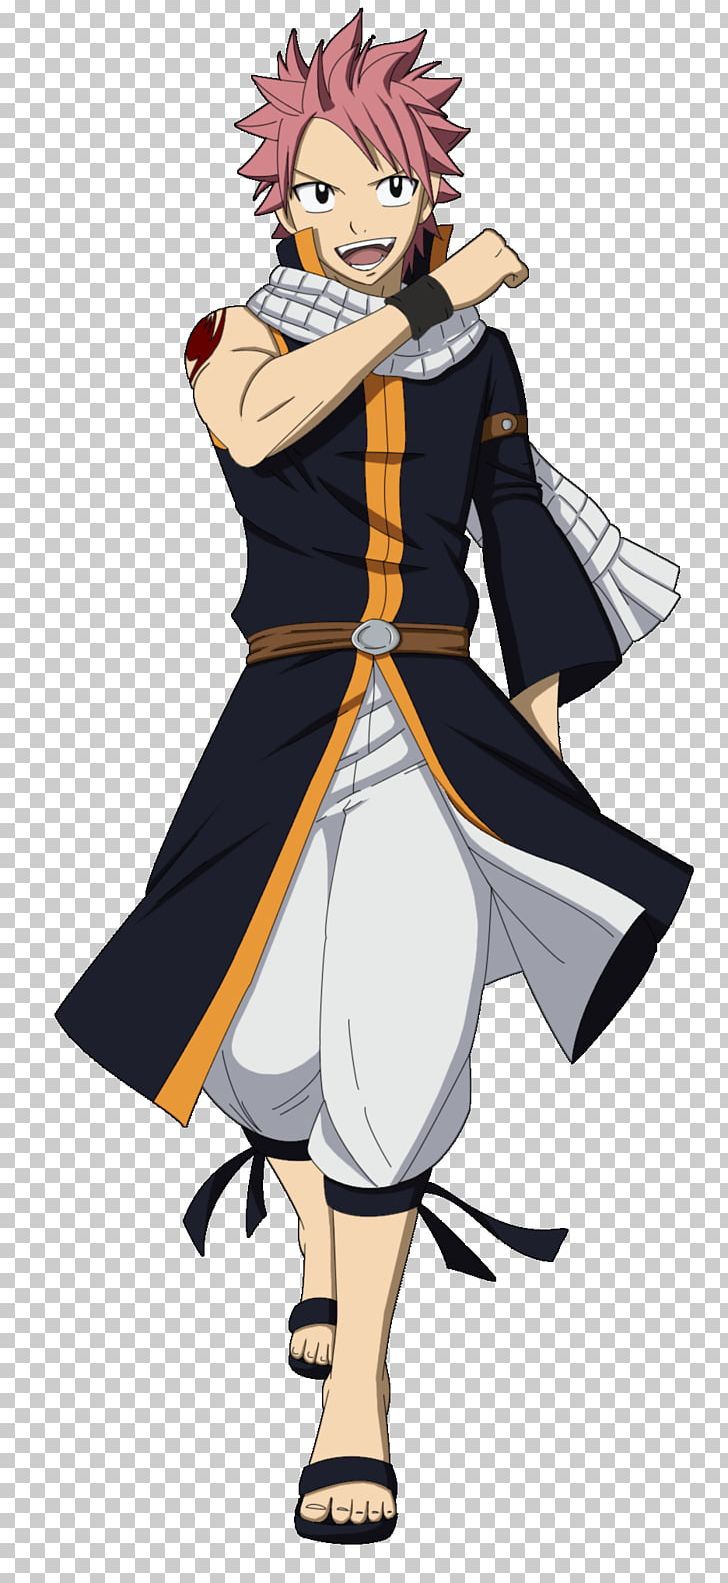 Natsu Dragneel Fairy Tail Anime PNG, Clipart, Anime, Art, Cartoon, Clothing, Cosplay Free PNG Download